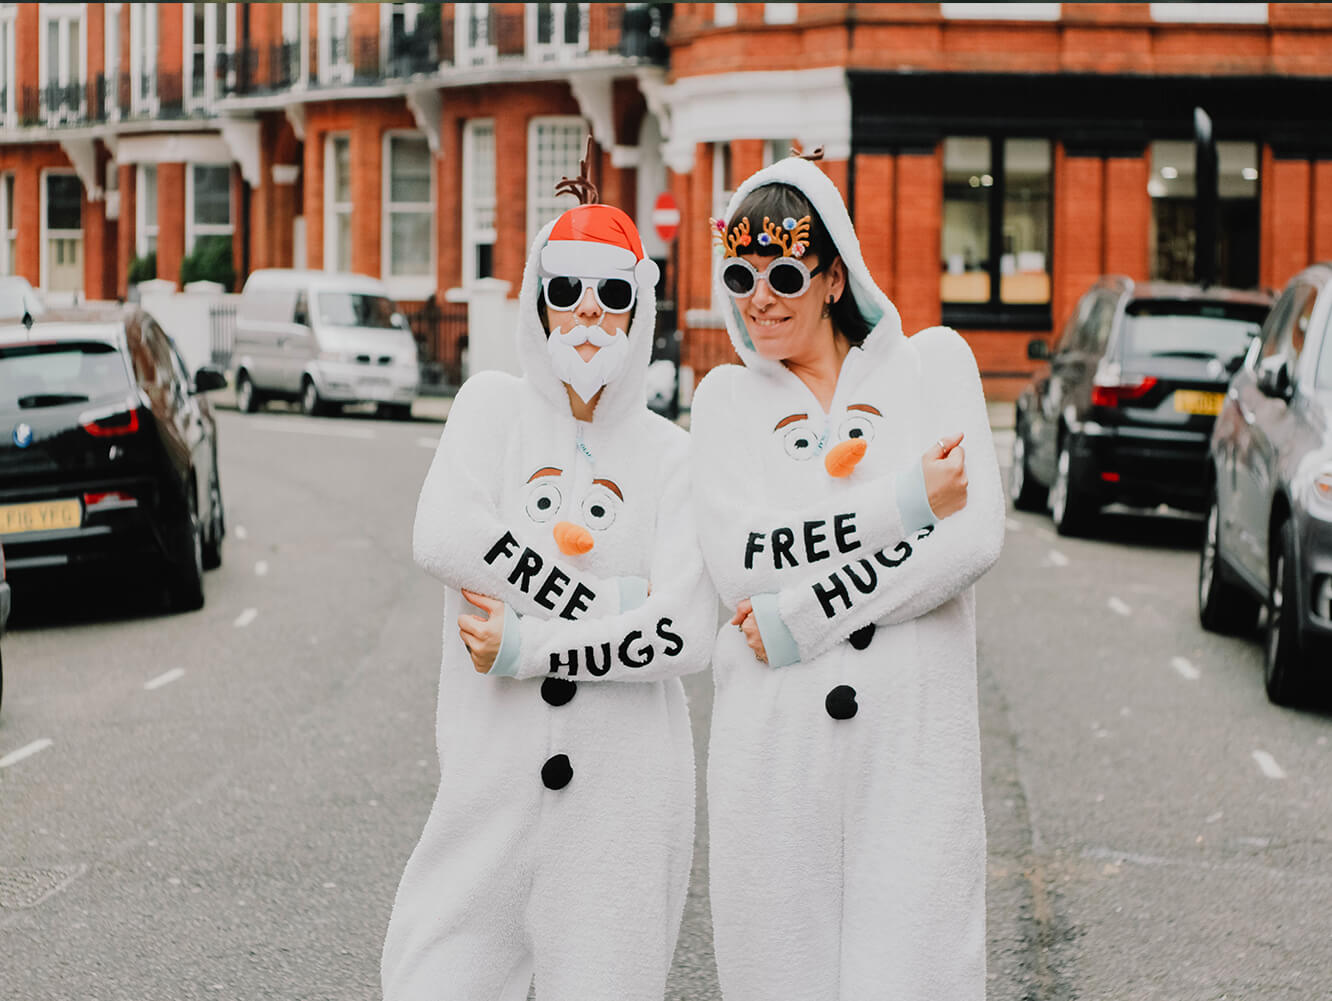 Don’t allow these free hugs to be a wasted. It’s a huge PR opportunity.